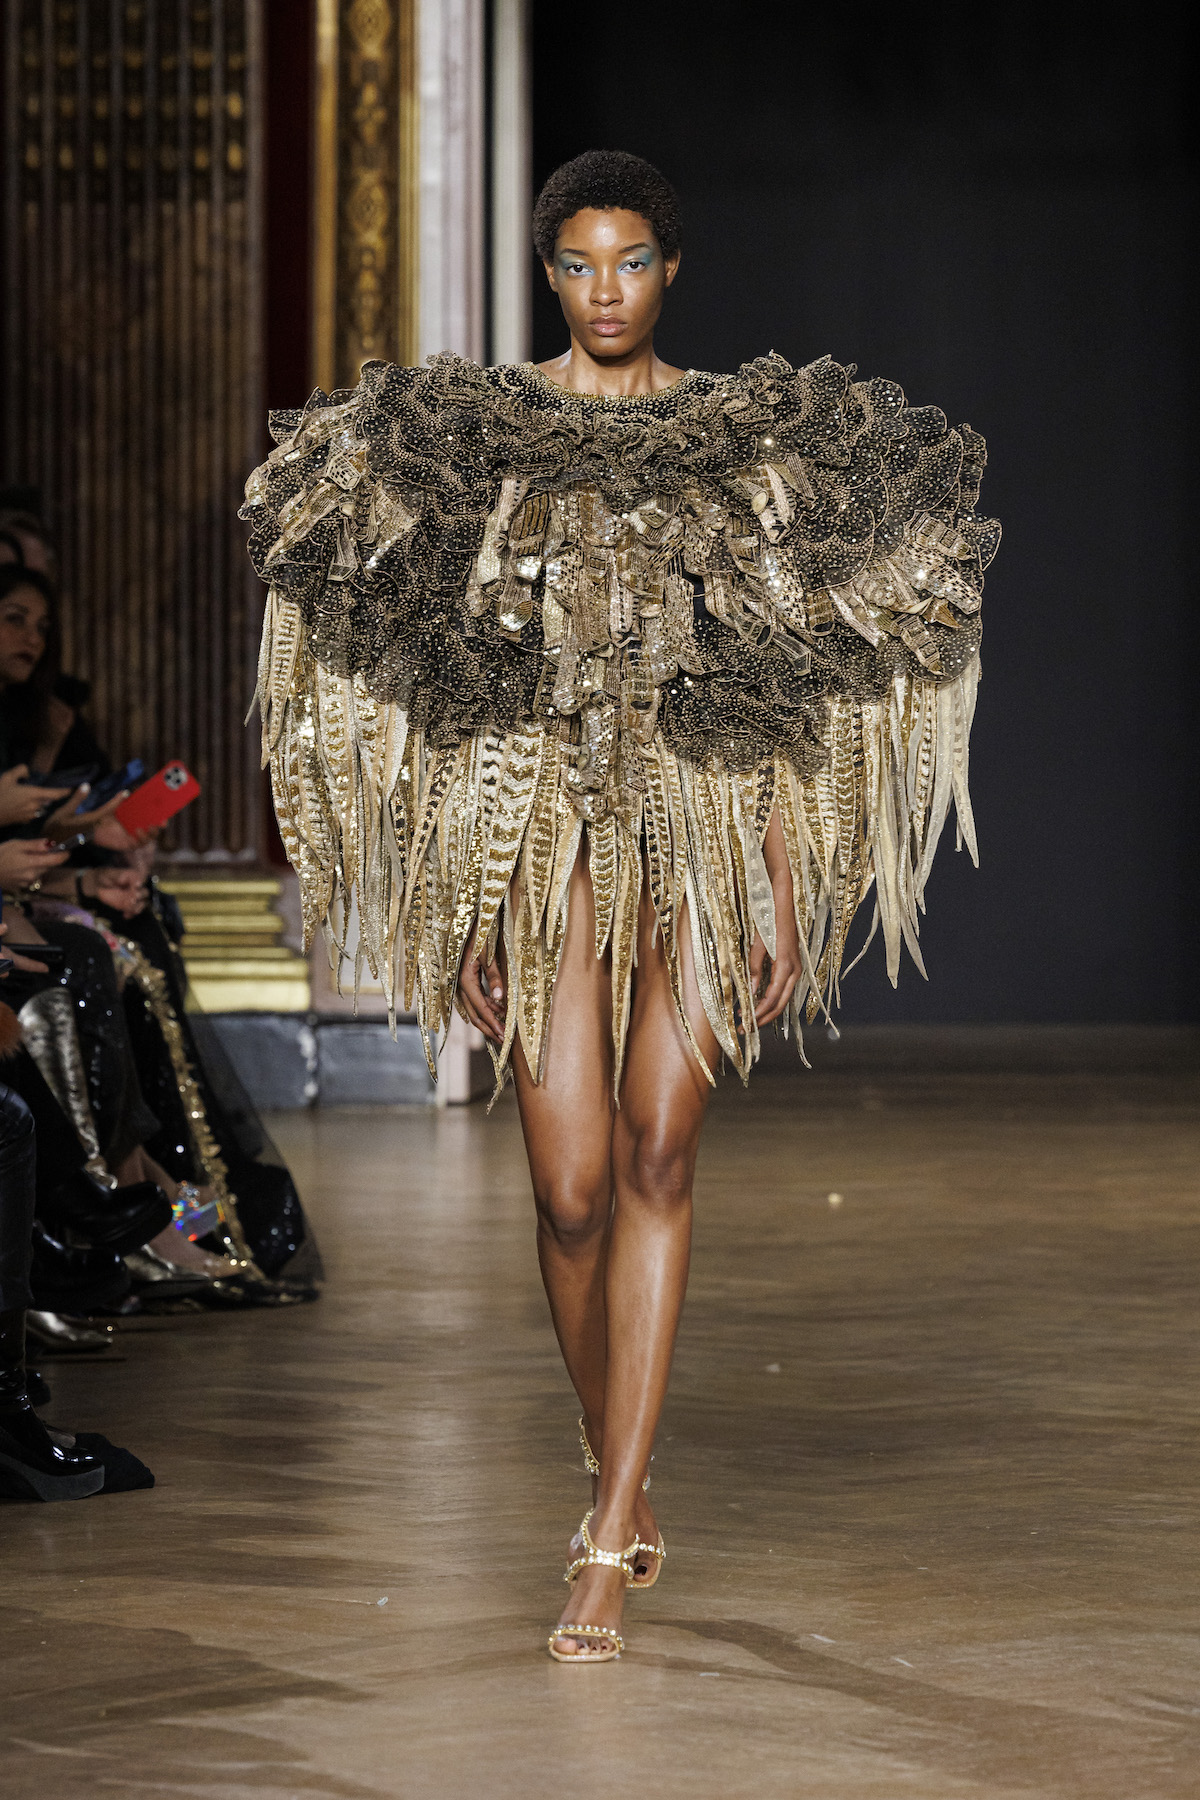 Model on the catwalk the Rahul Mishra Fashion show in Paris, Spring Summer 2023 Couture Fashion Week